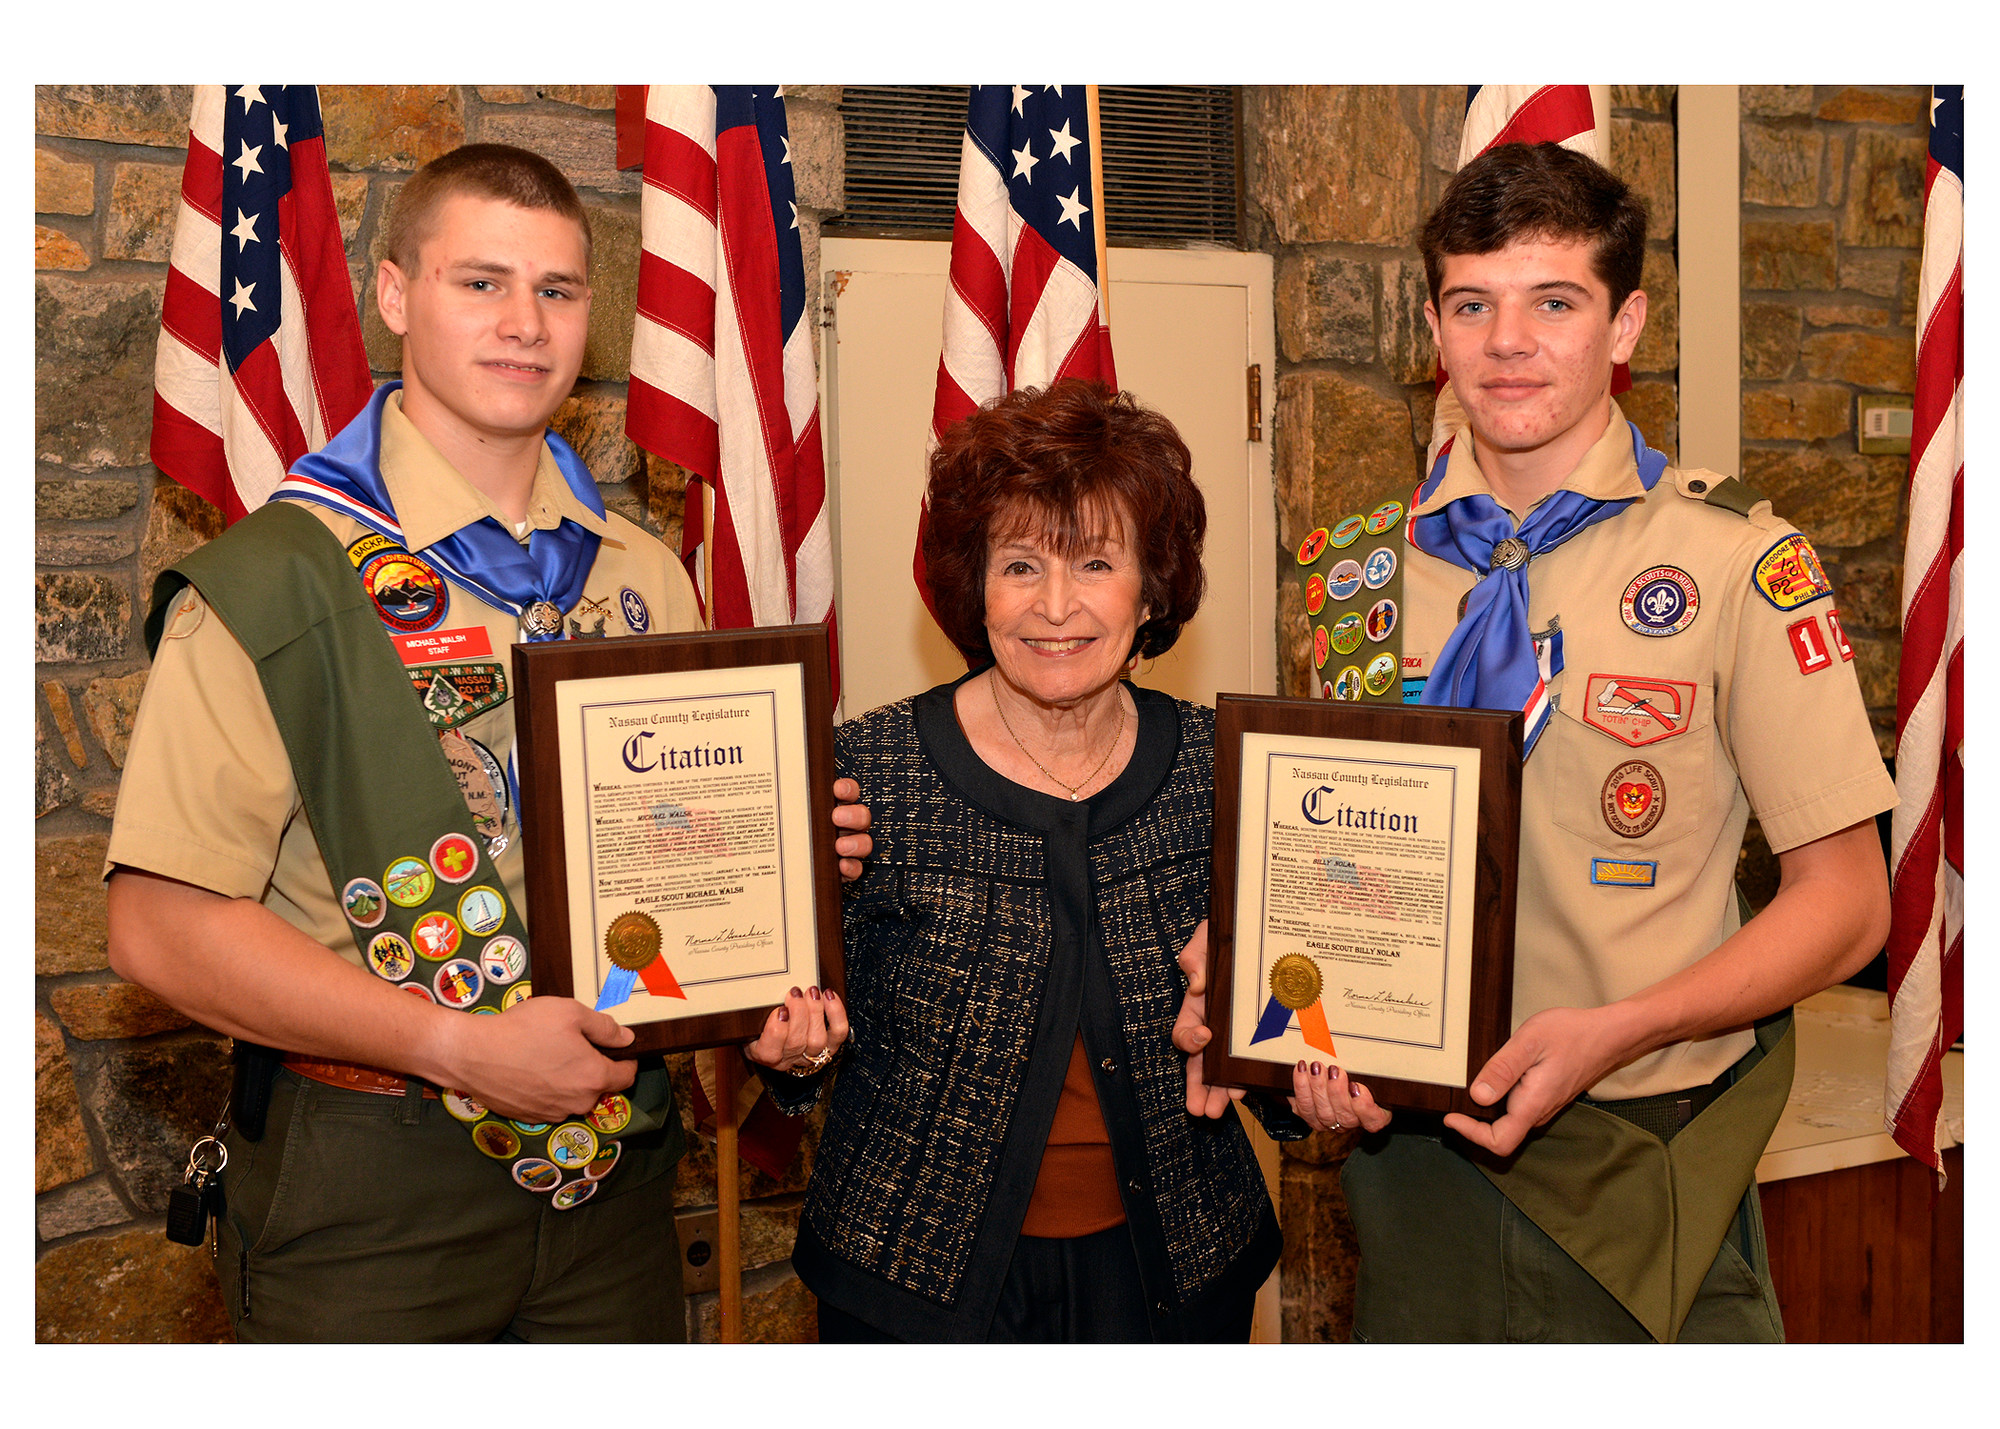 East Meadow Eagle Scout Michael Walsh, left, and Billy Nolan, both of Troop 123, were congratulated by Nassau County Legislature Presiding Officer Norma Gonsalves for their community service.